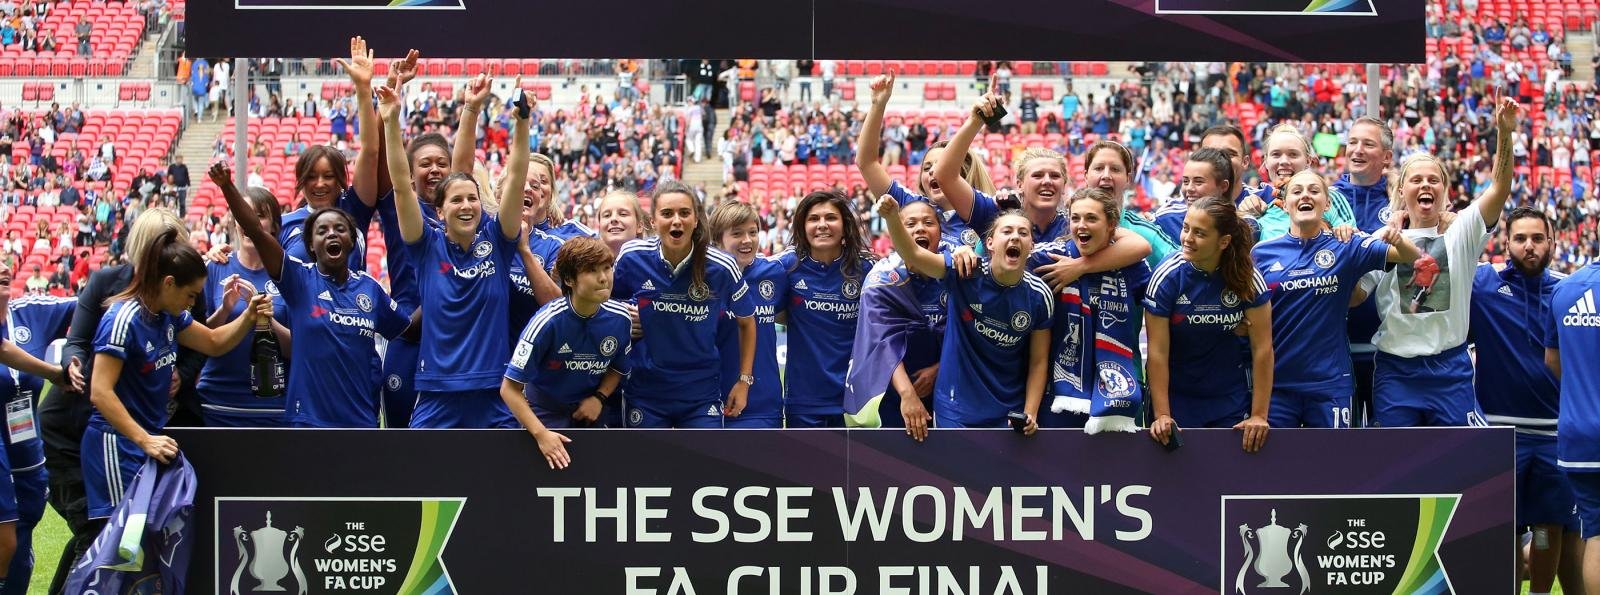 Women’s FA Cup Final Round-Up: Chelsea 1-0 Notts County